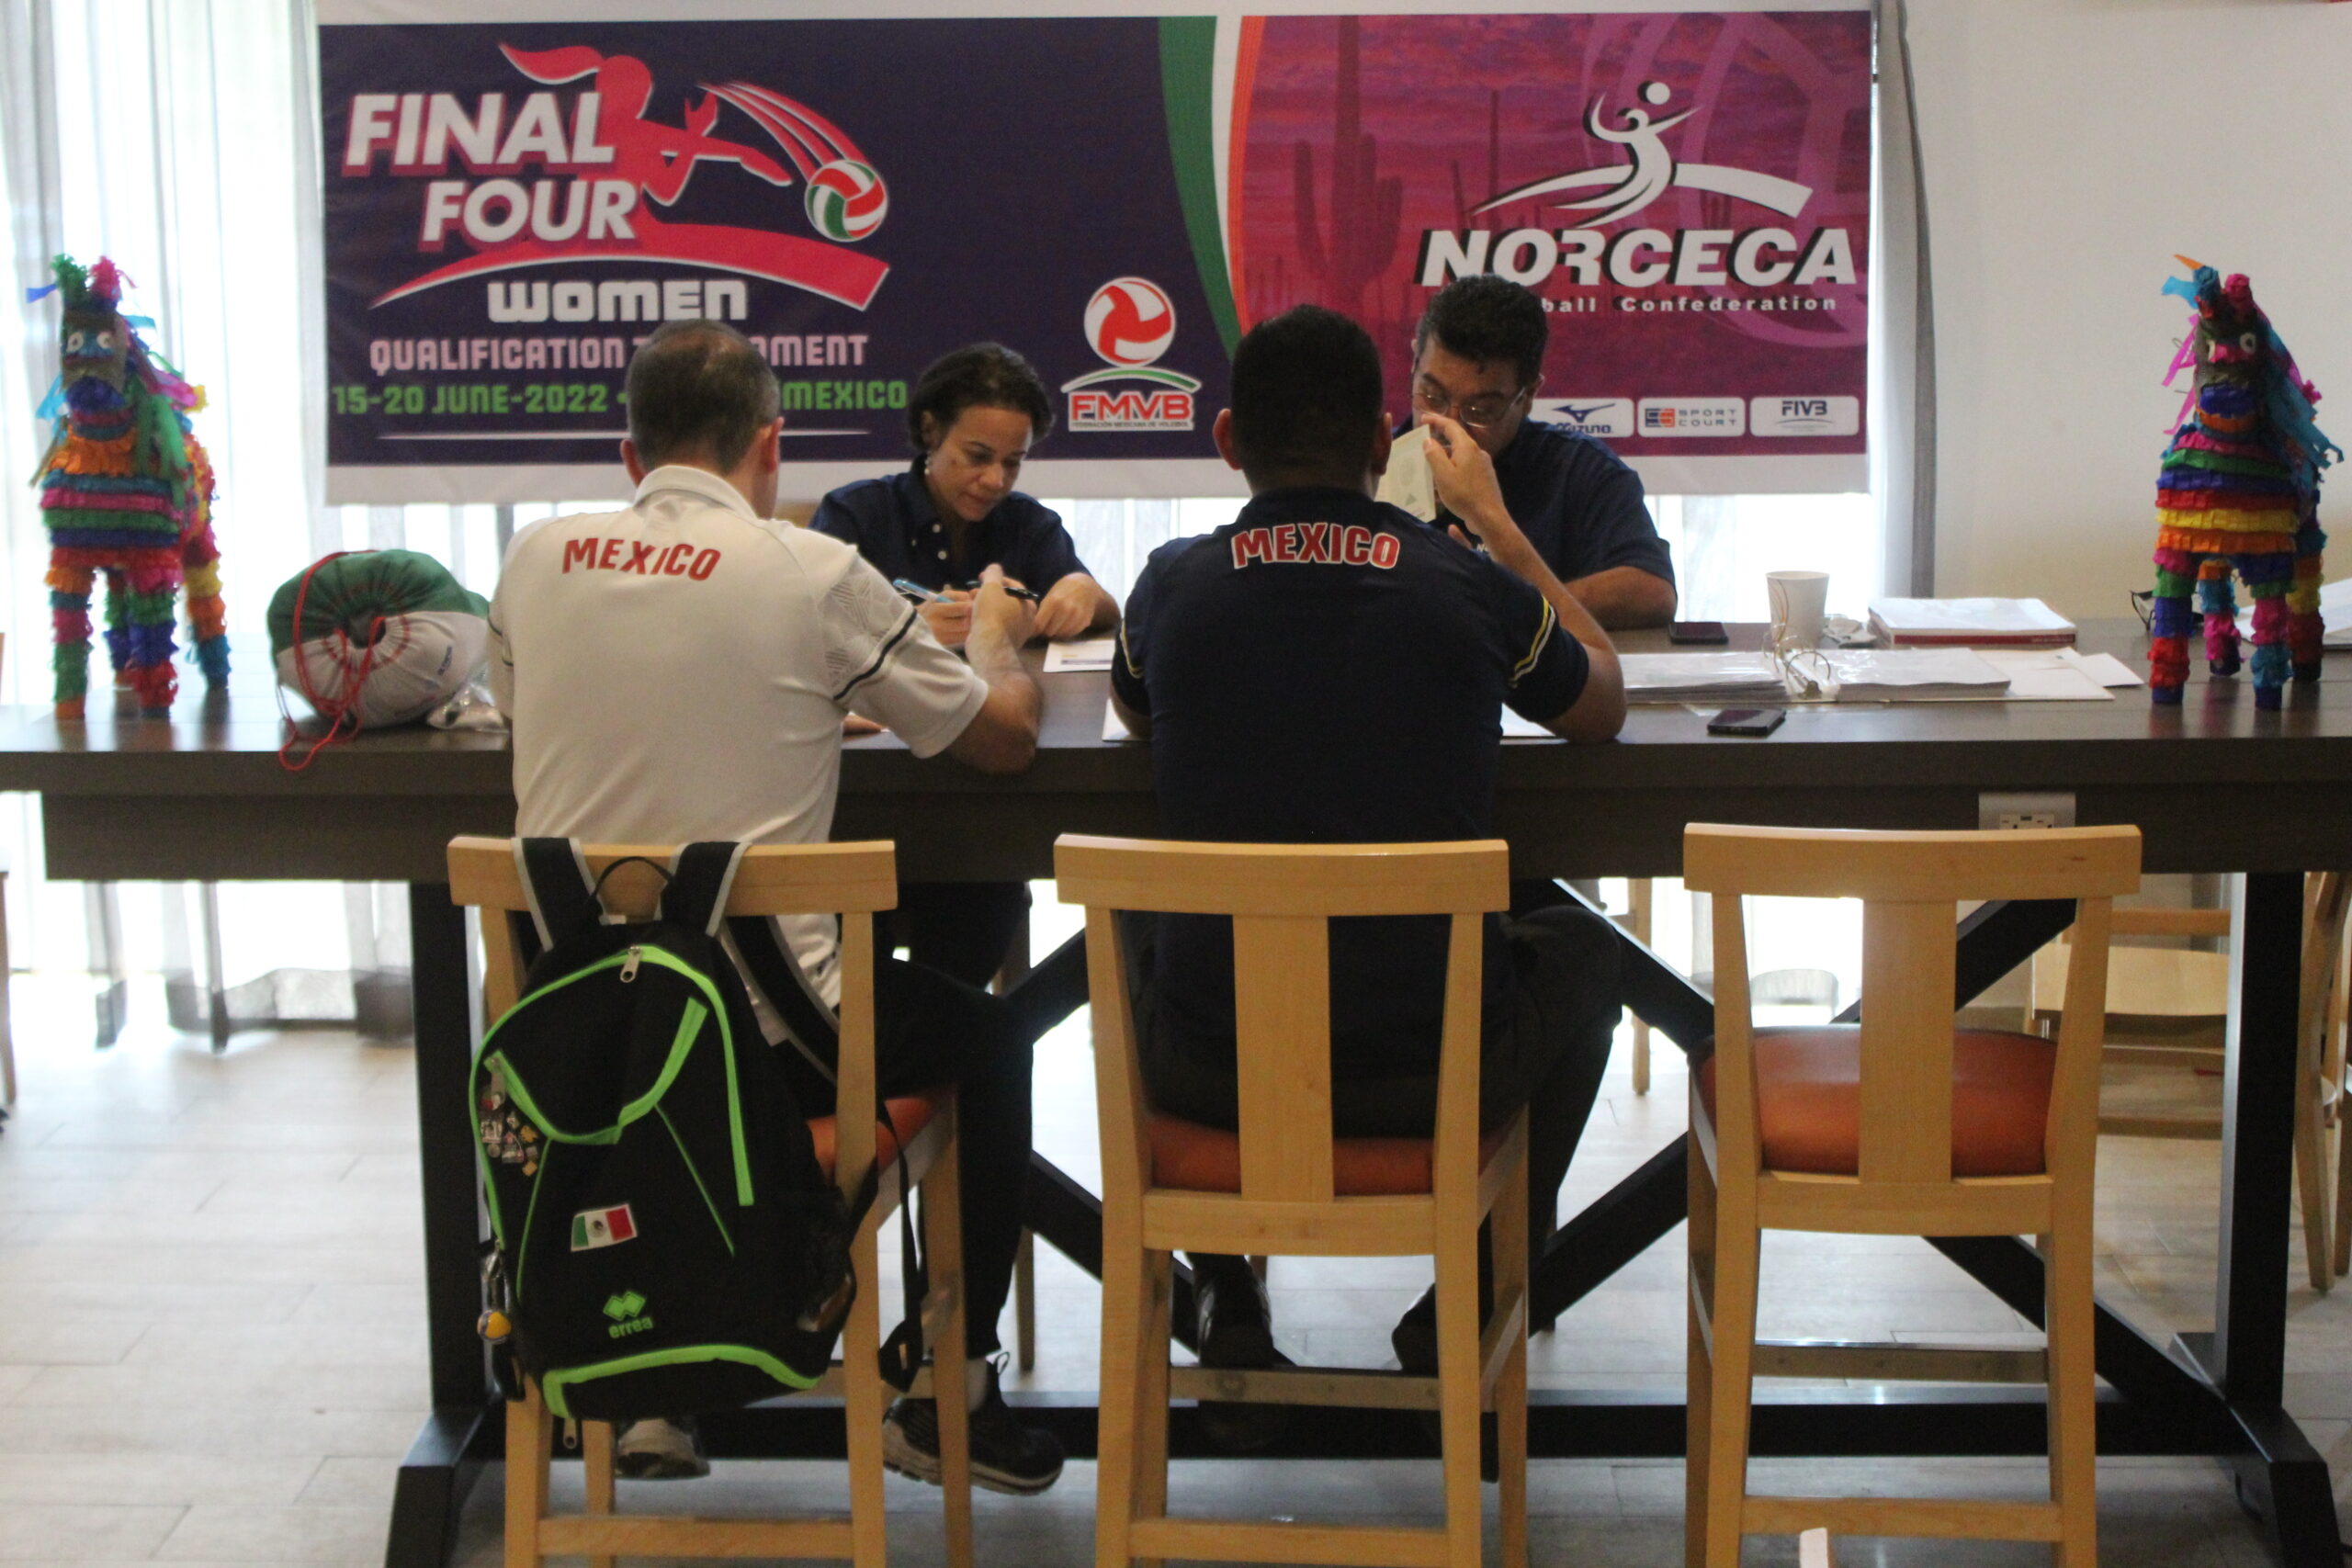 Teams are excited for the NORCECA Women’s Final Four to start